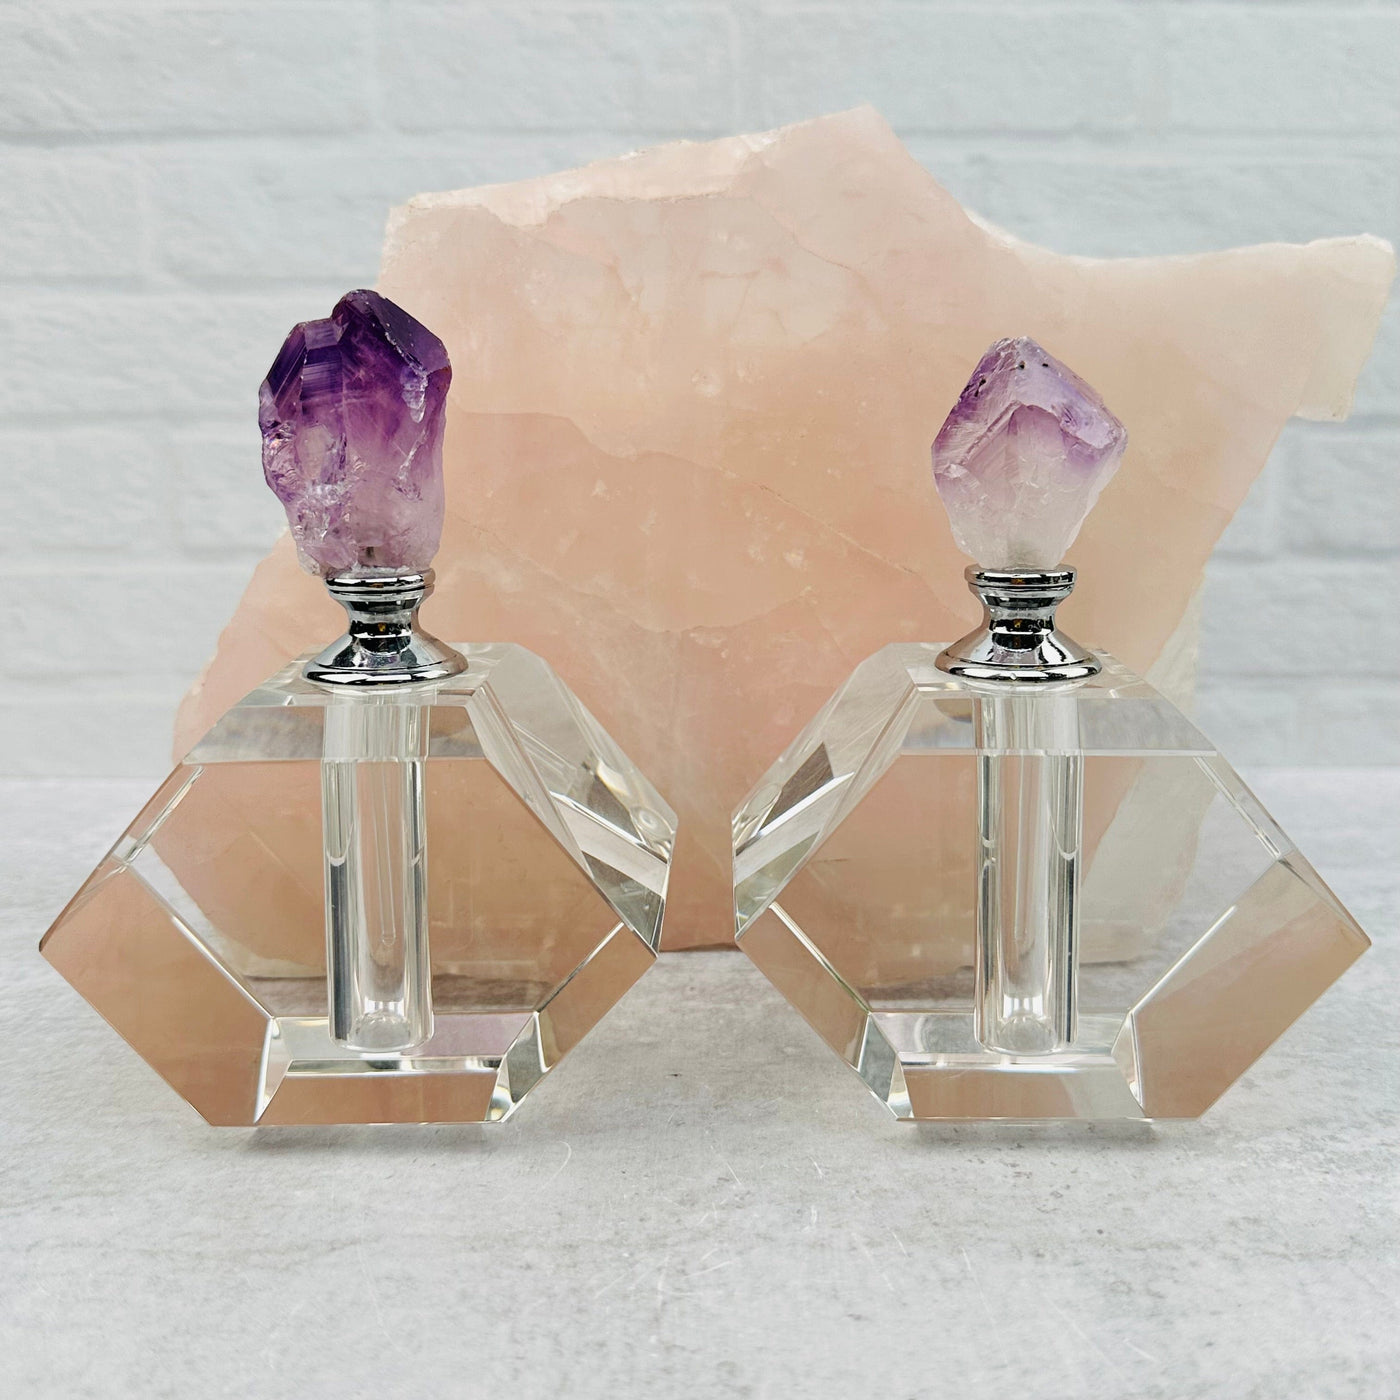 Amethyst Crystal Point Top Large Perfume Bottles displayed as home decor 